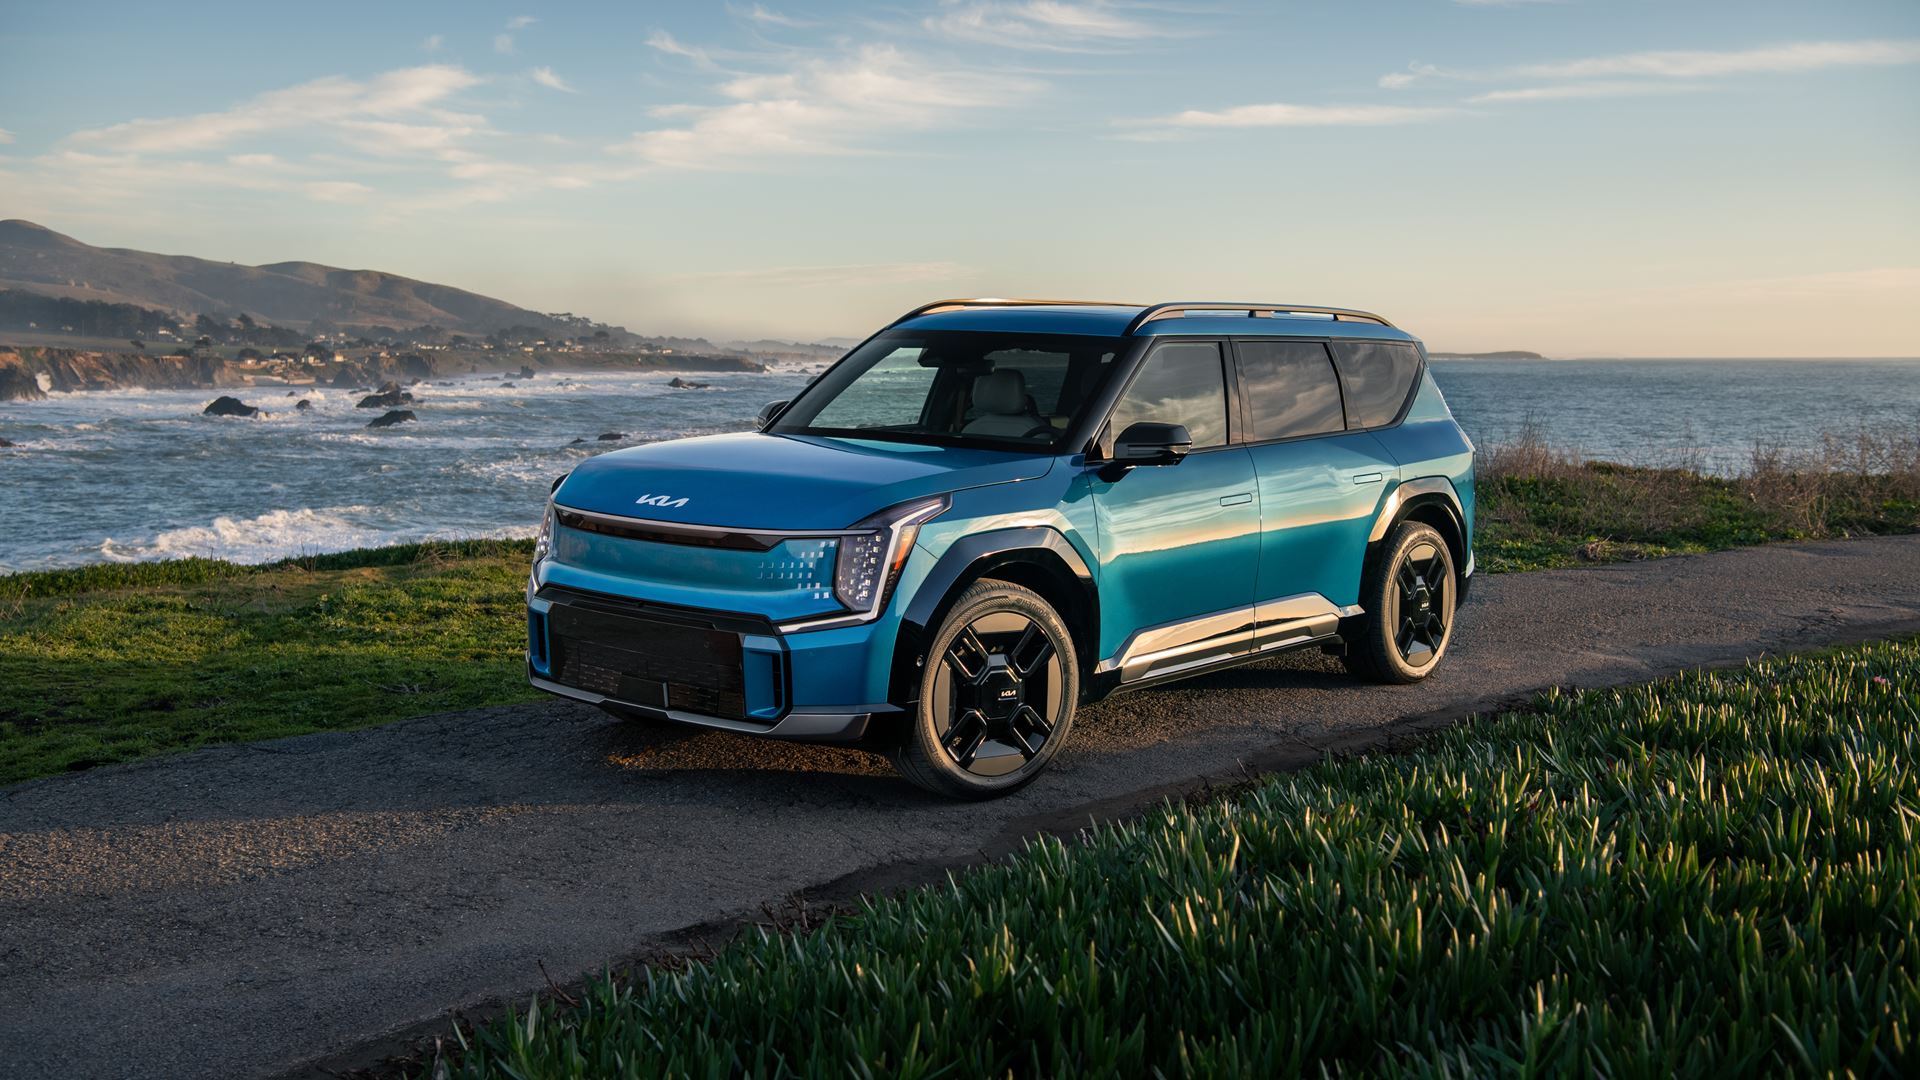 The 2024 Kia EV9 has been recognized as an industry leader by AutoTrader in the publication’s annual rankings of “Best..